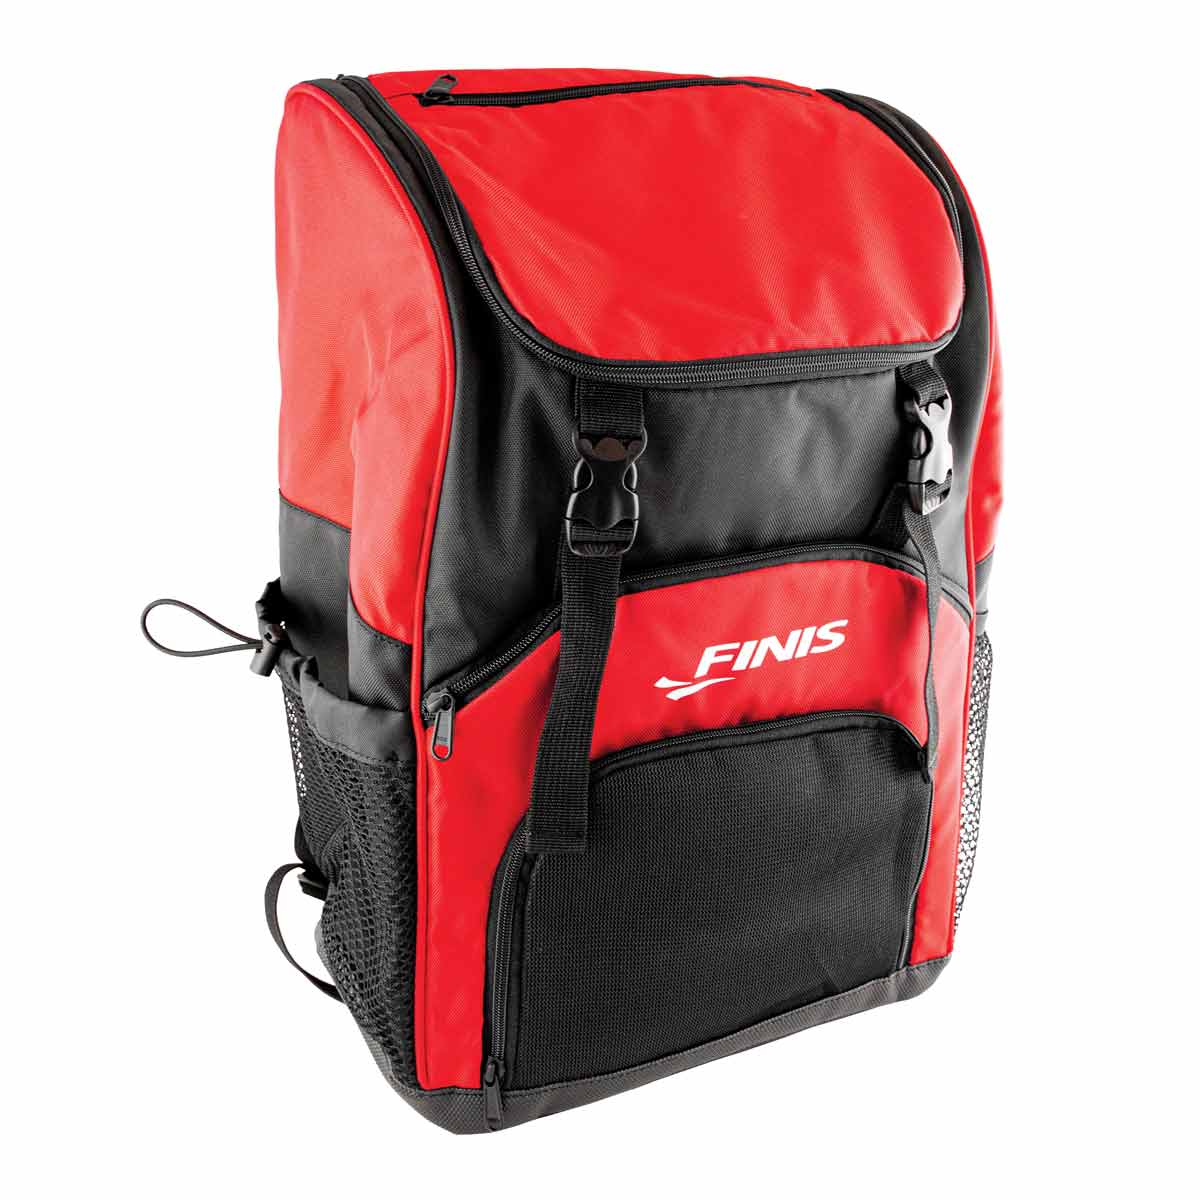 FINIS Team Backpack - Red